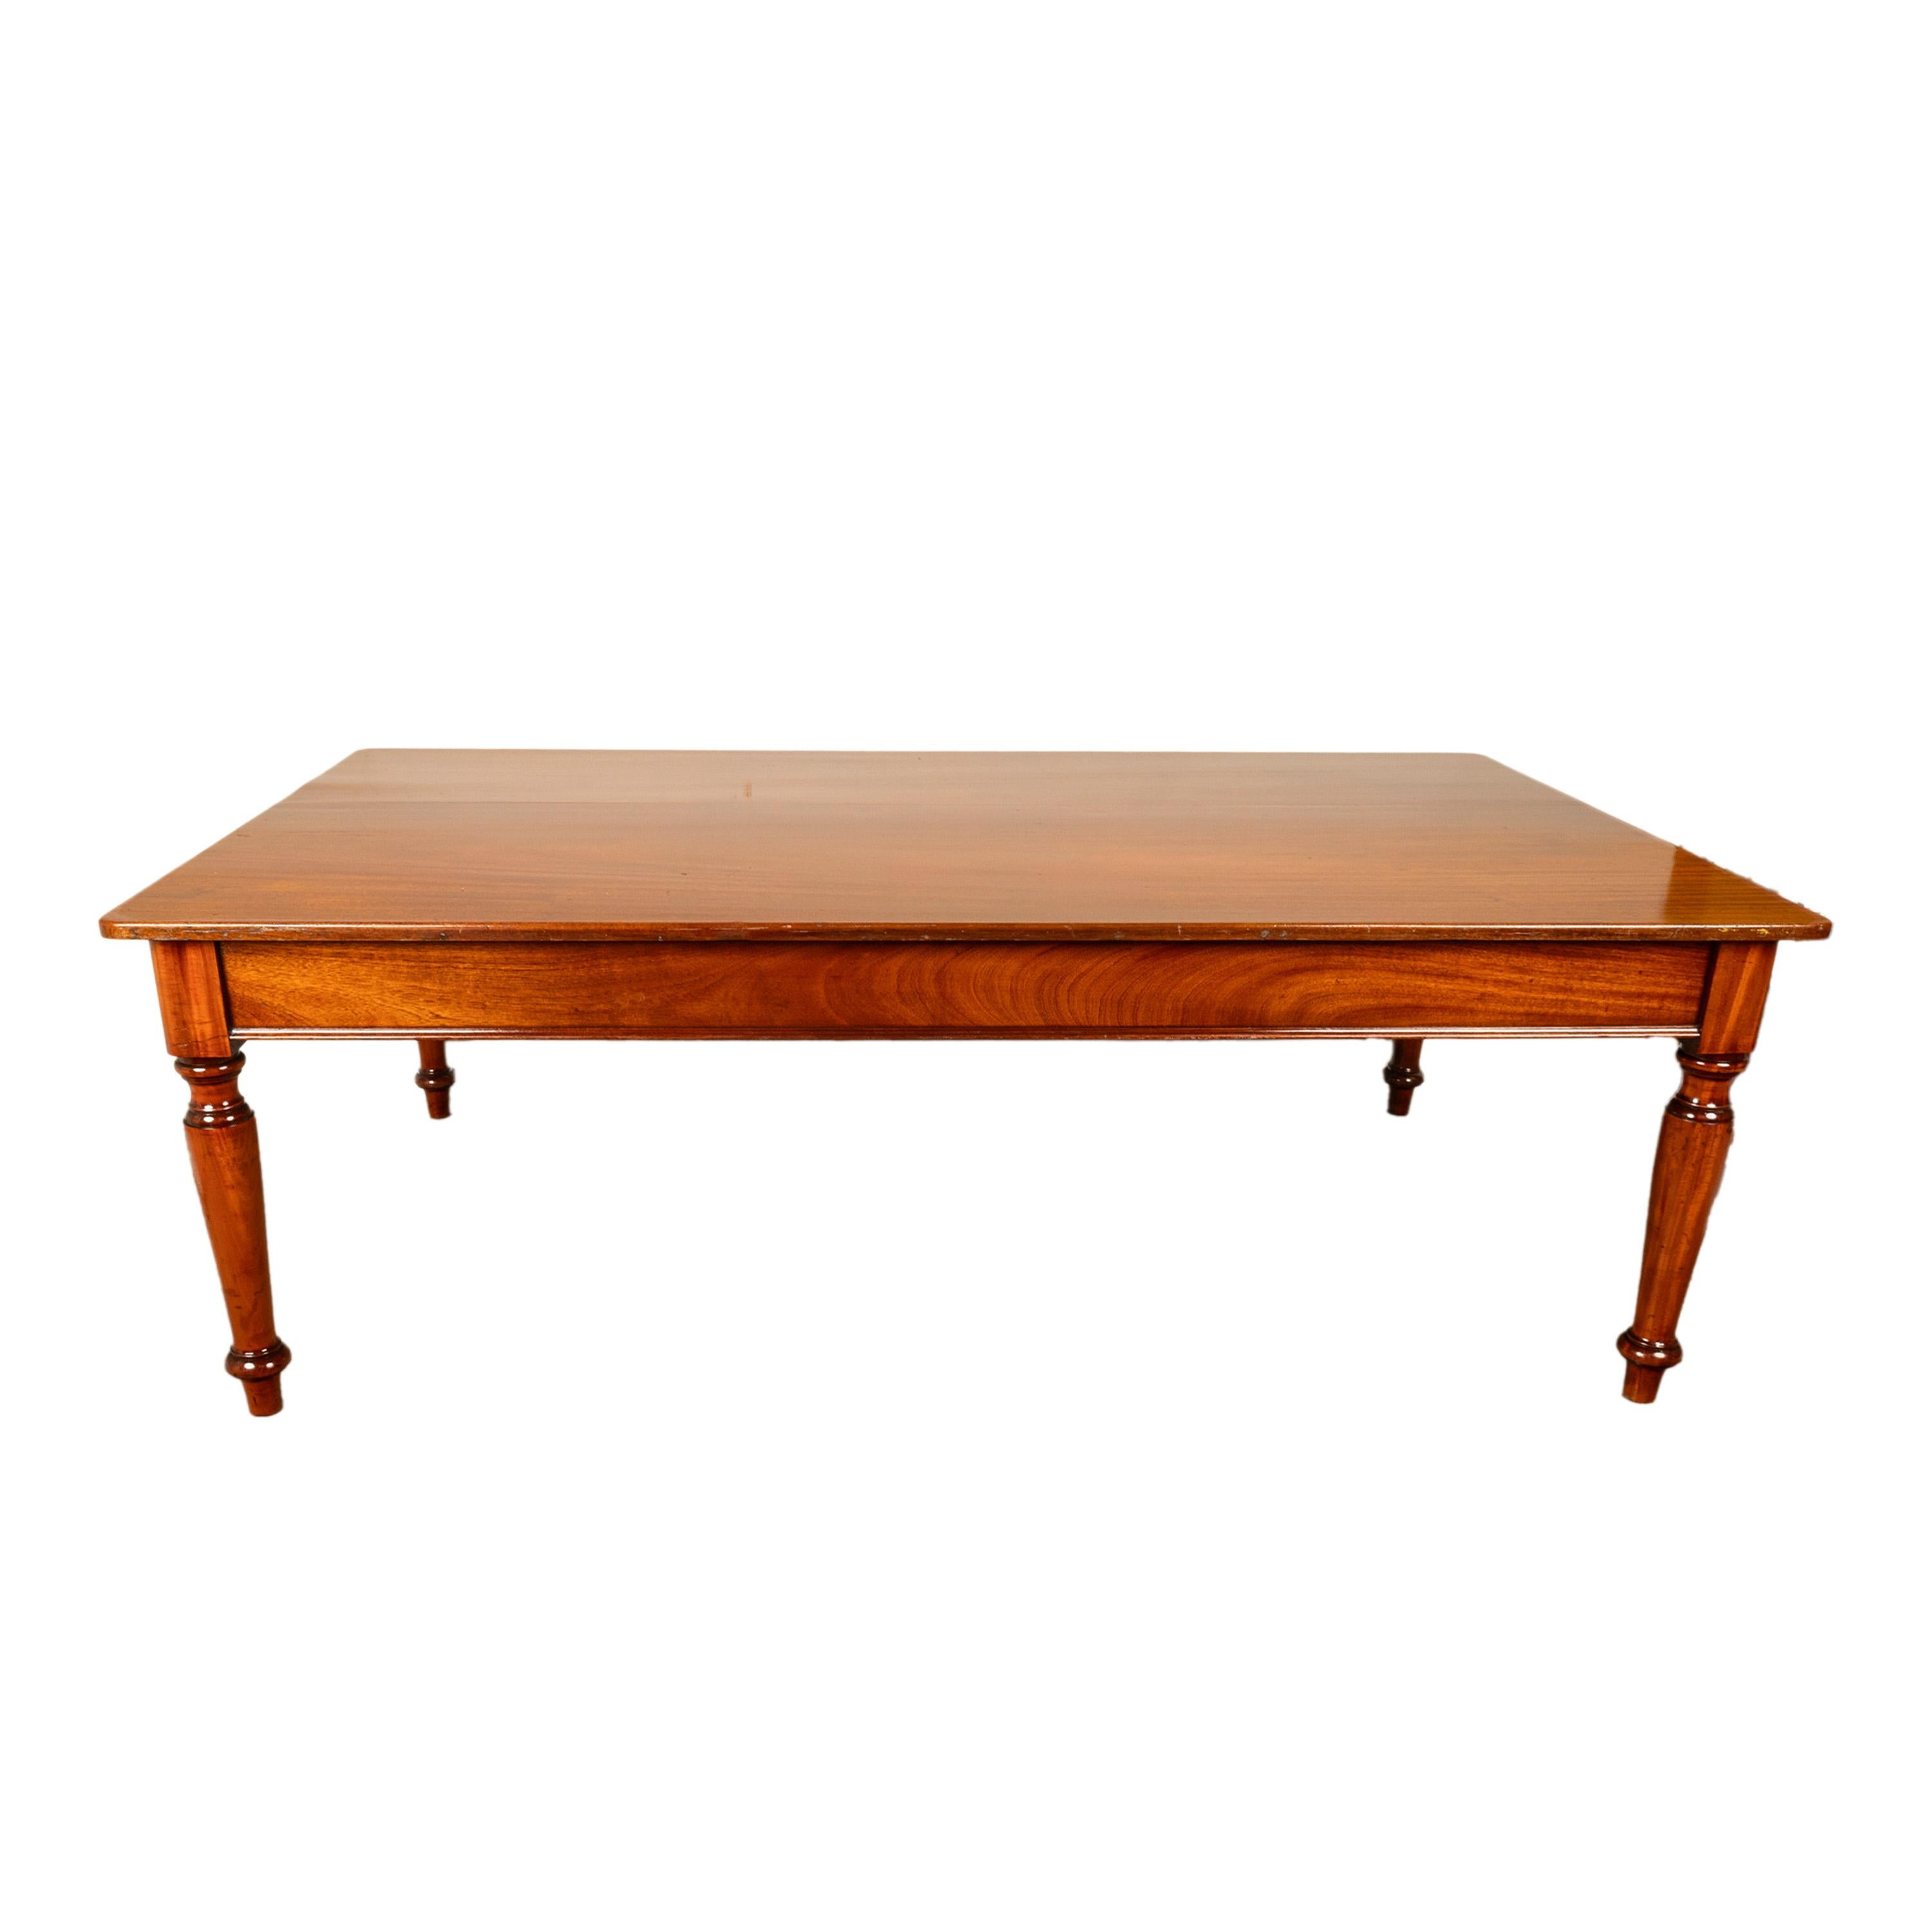 Antique Monumental 19th Century Mahogany Library Conference Dining Table 1860 For Sale 8